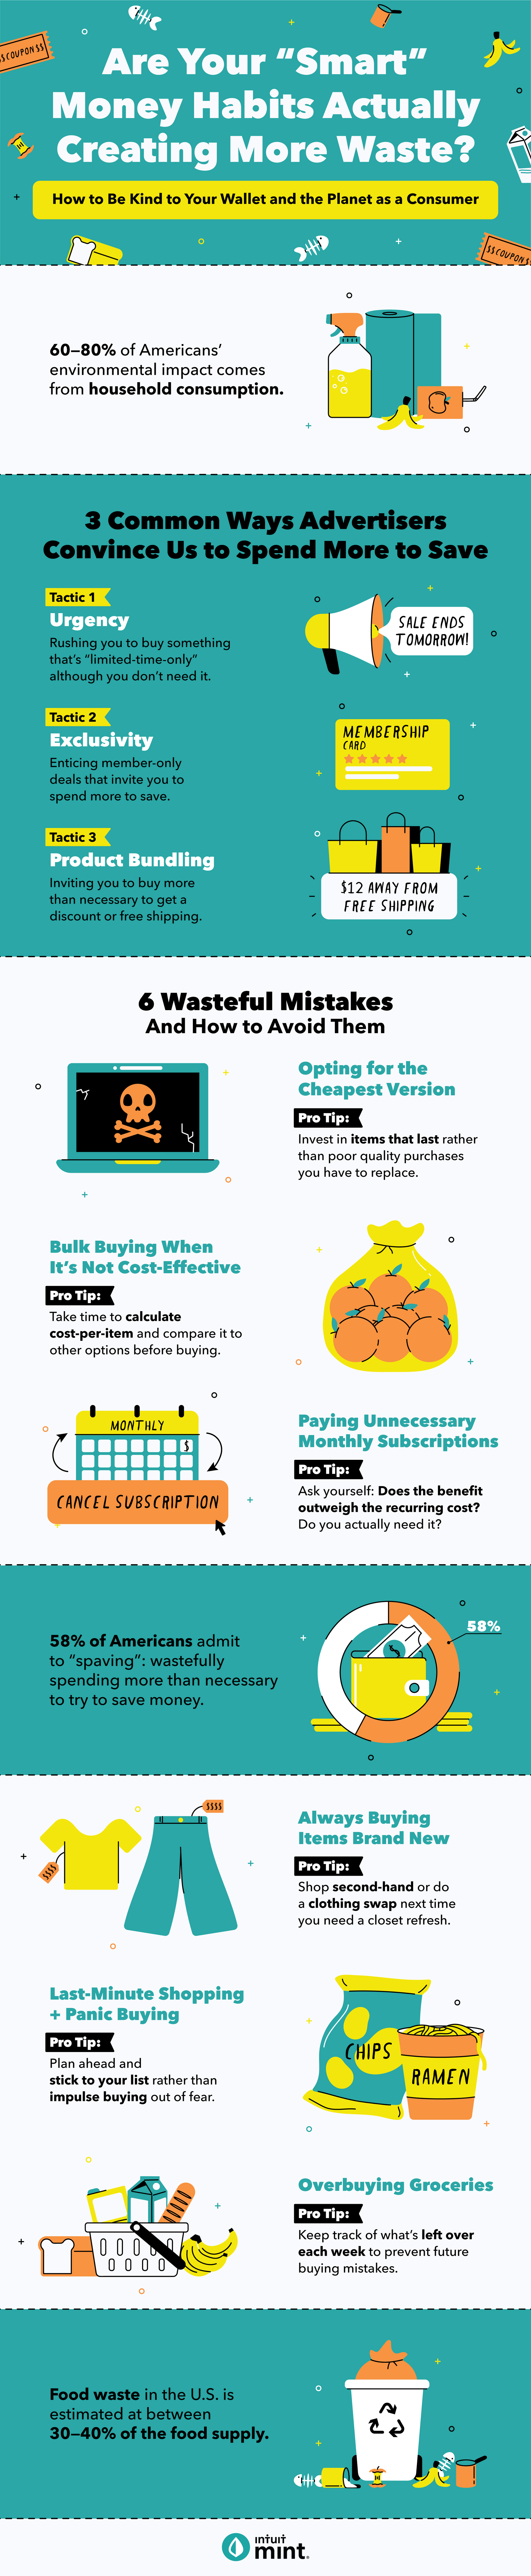 Infographic with tips to avoid wasteful spending